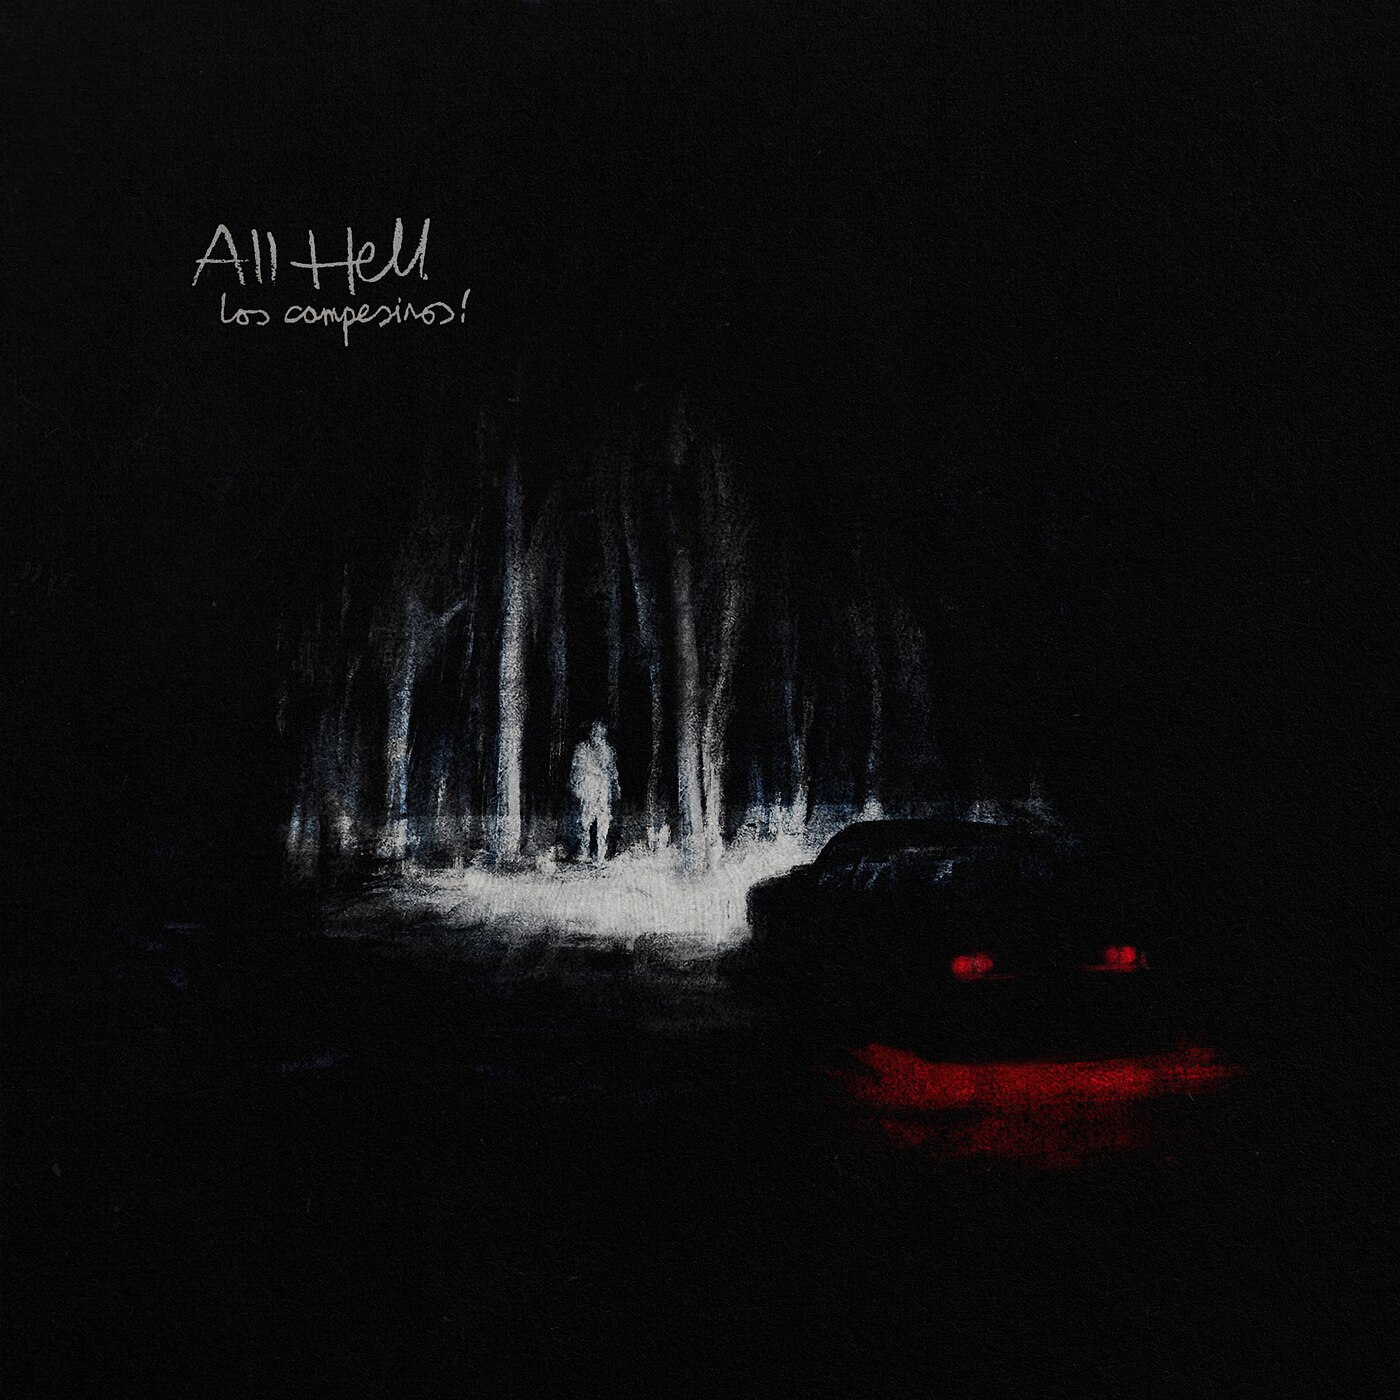 dark drawing of a person in the woods lit up by the headlights on a car